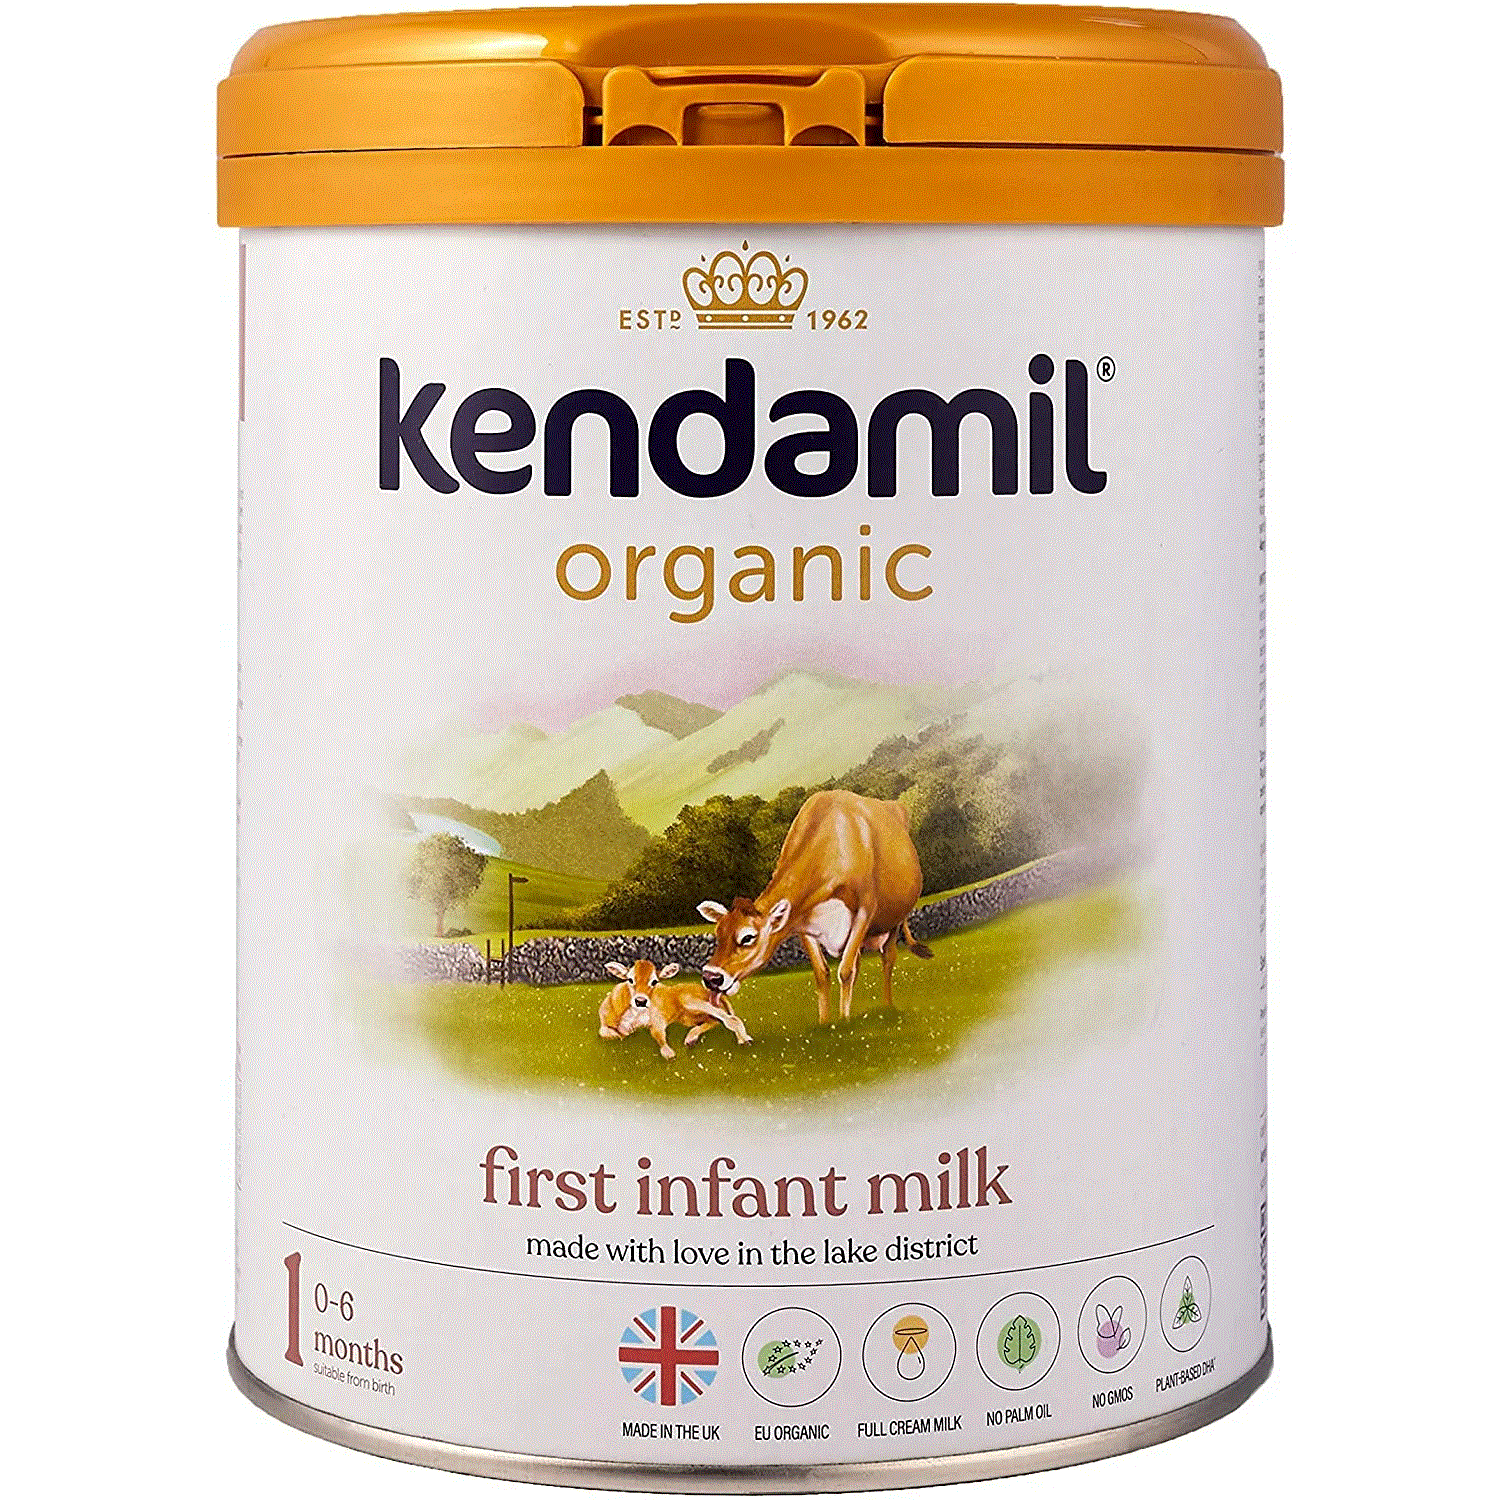 Discover Kendamil Baby Formula: The Best Choice for Your Little One